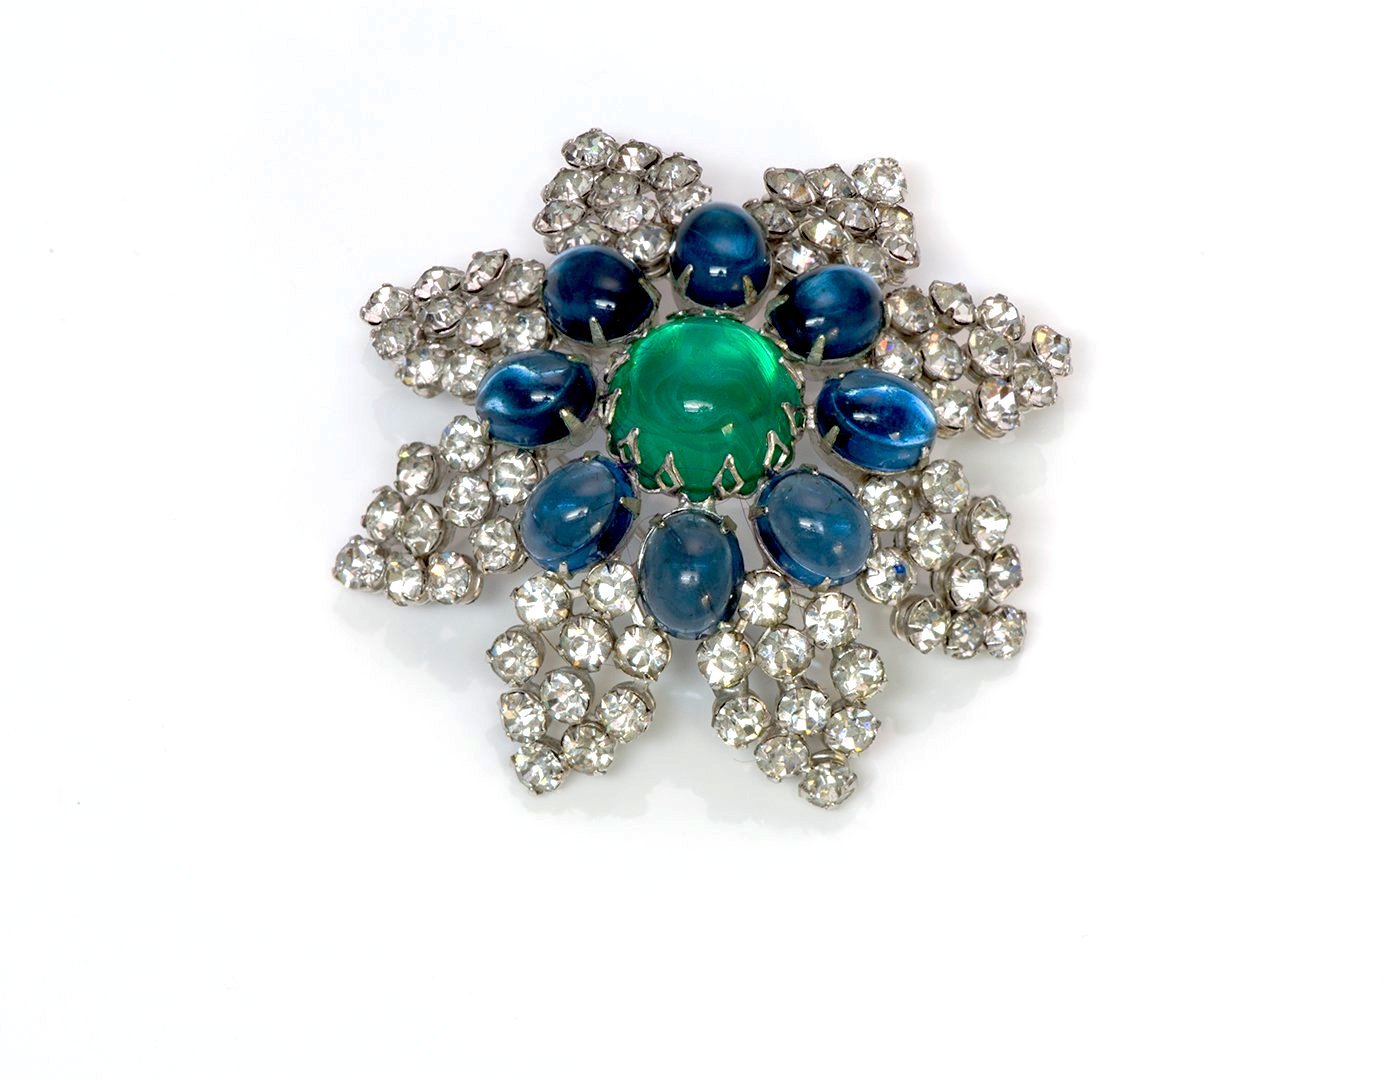 Arnold Scaasi Couture Faux Emerald Sapphire Cabochon Glass Brooch